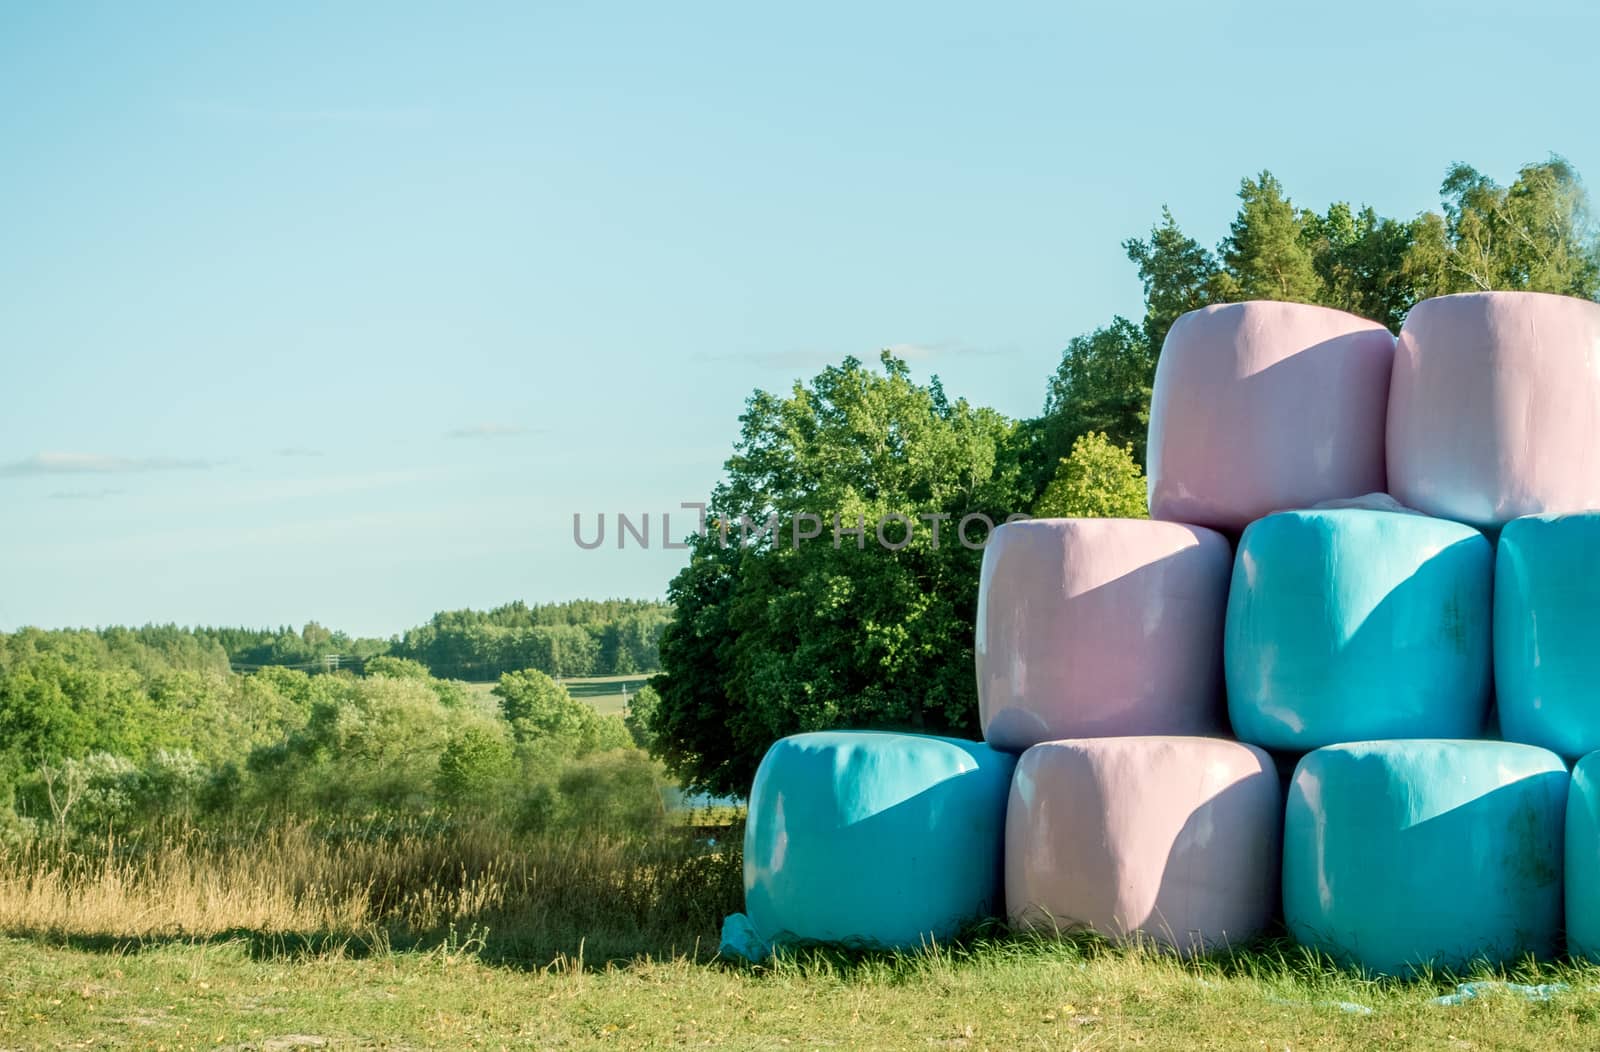 Pink and Blue Large Round Bale Silage